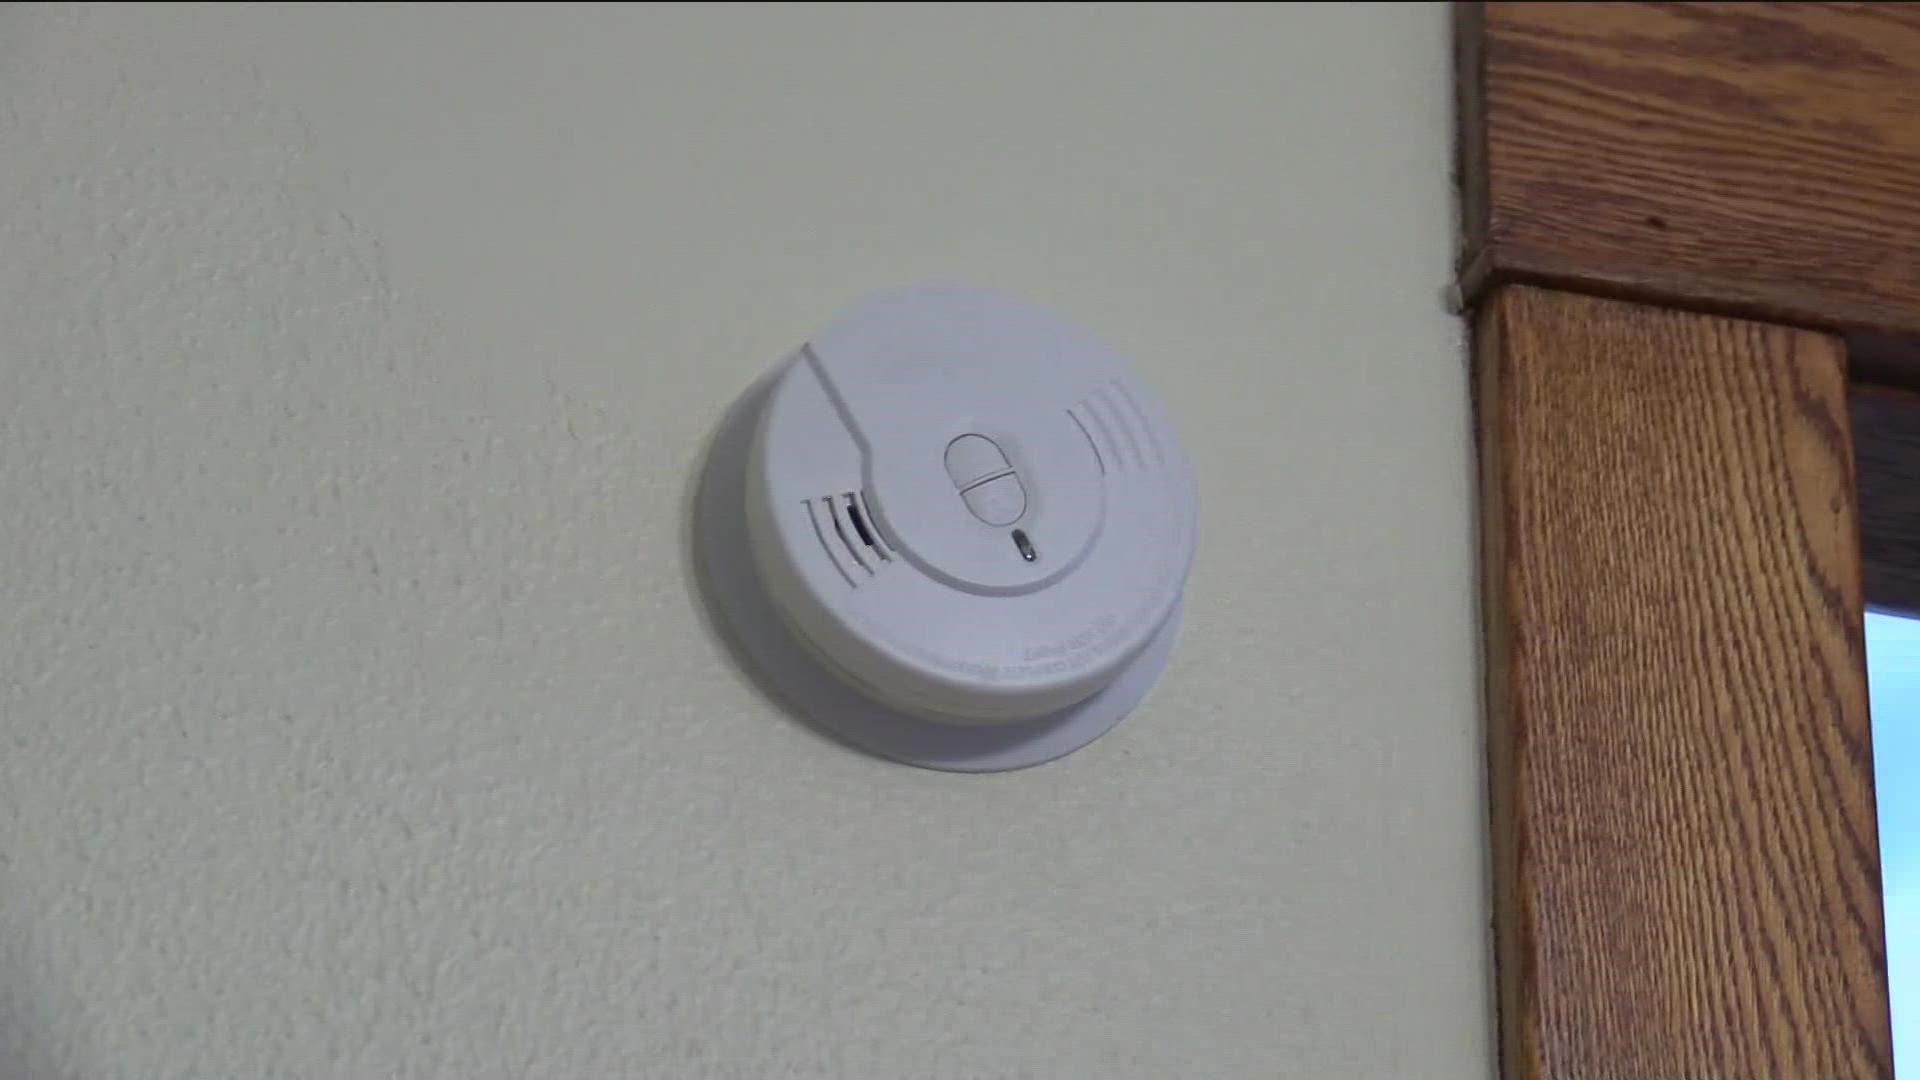 Smoke alarms that are properly installed and maintained play a vital role in reducing fire deaths and injuries